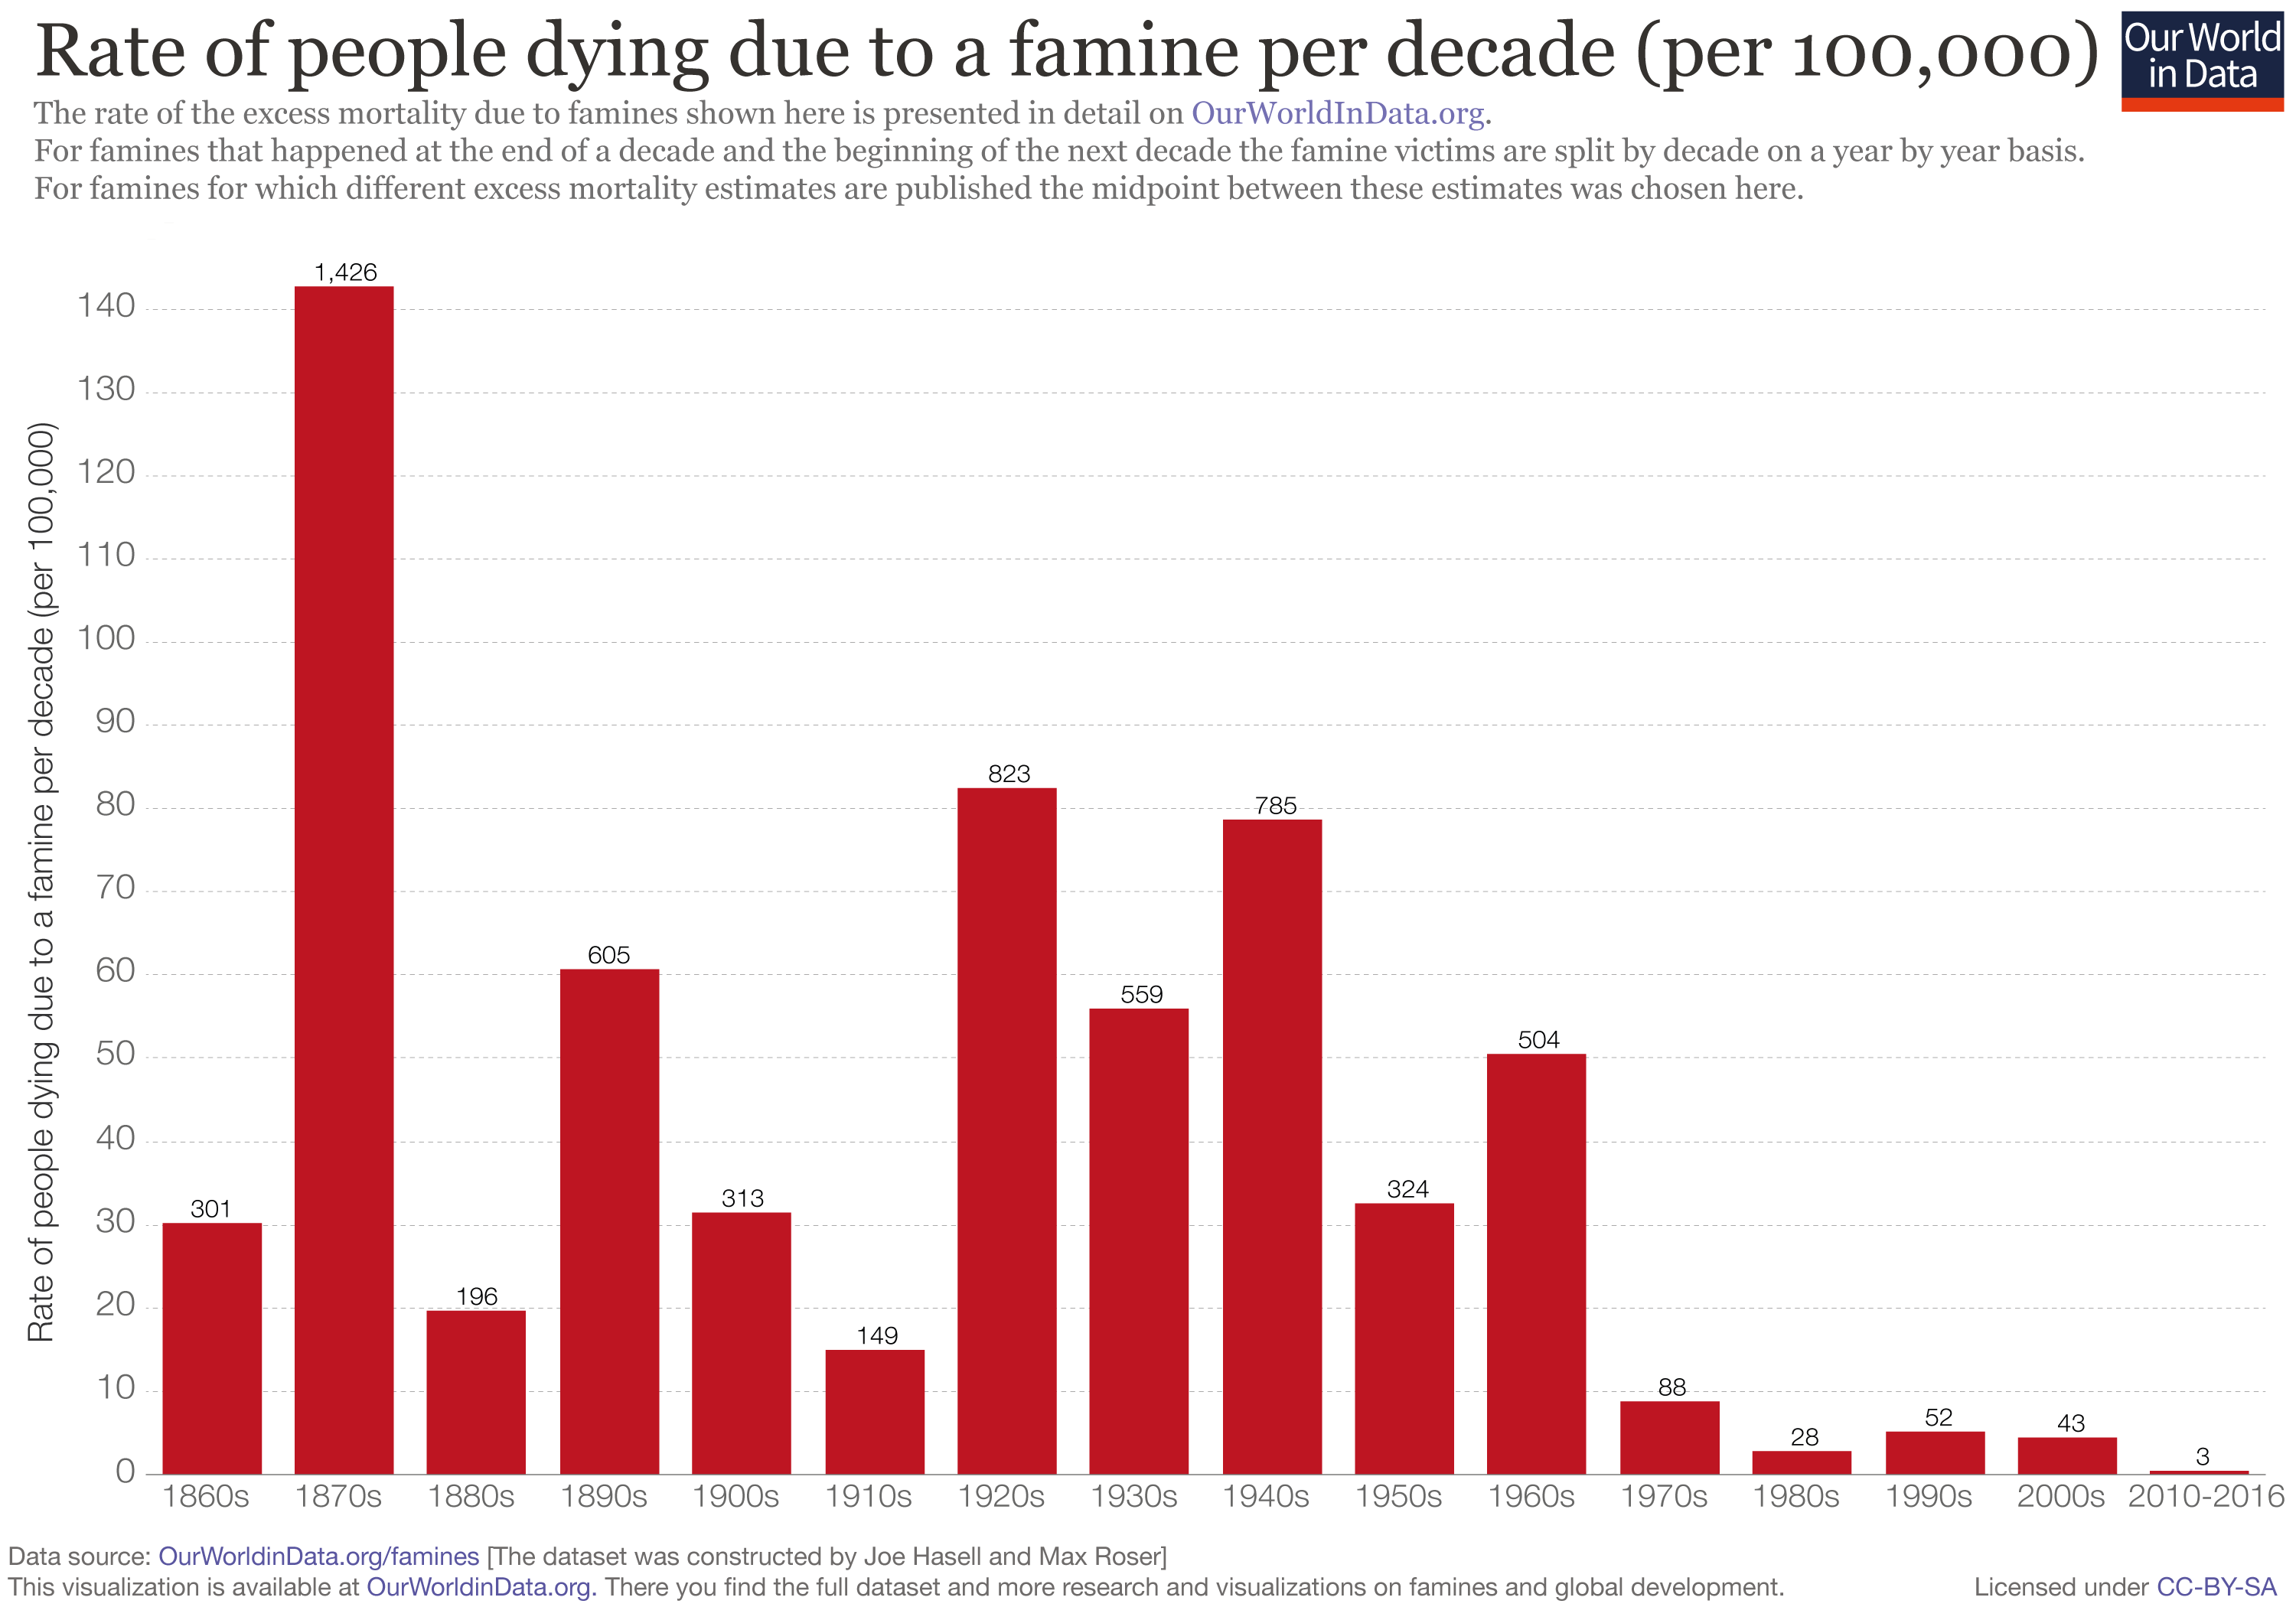 Famine death rate since 1860s